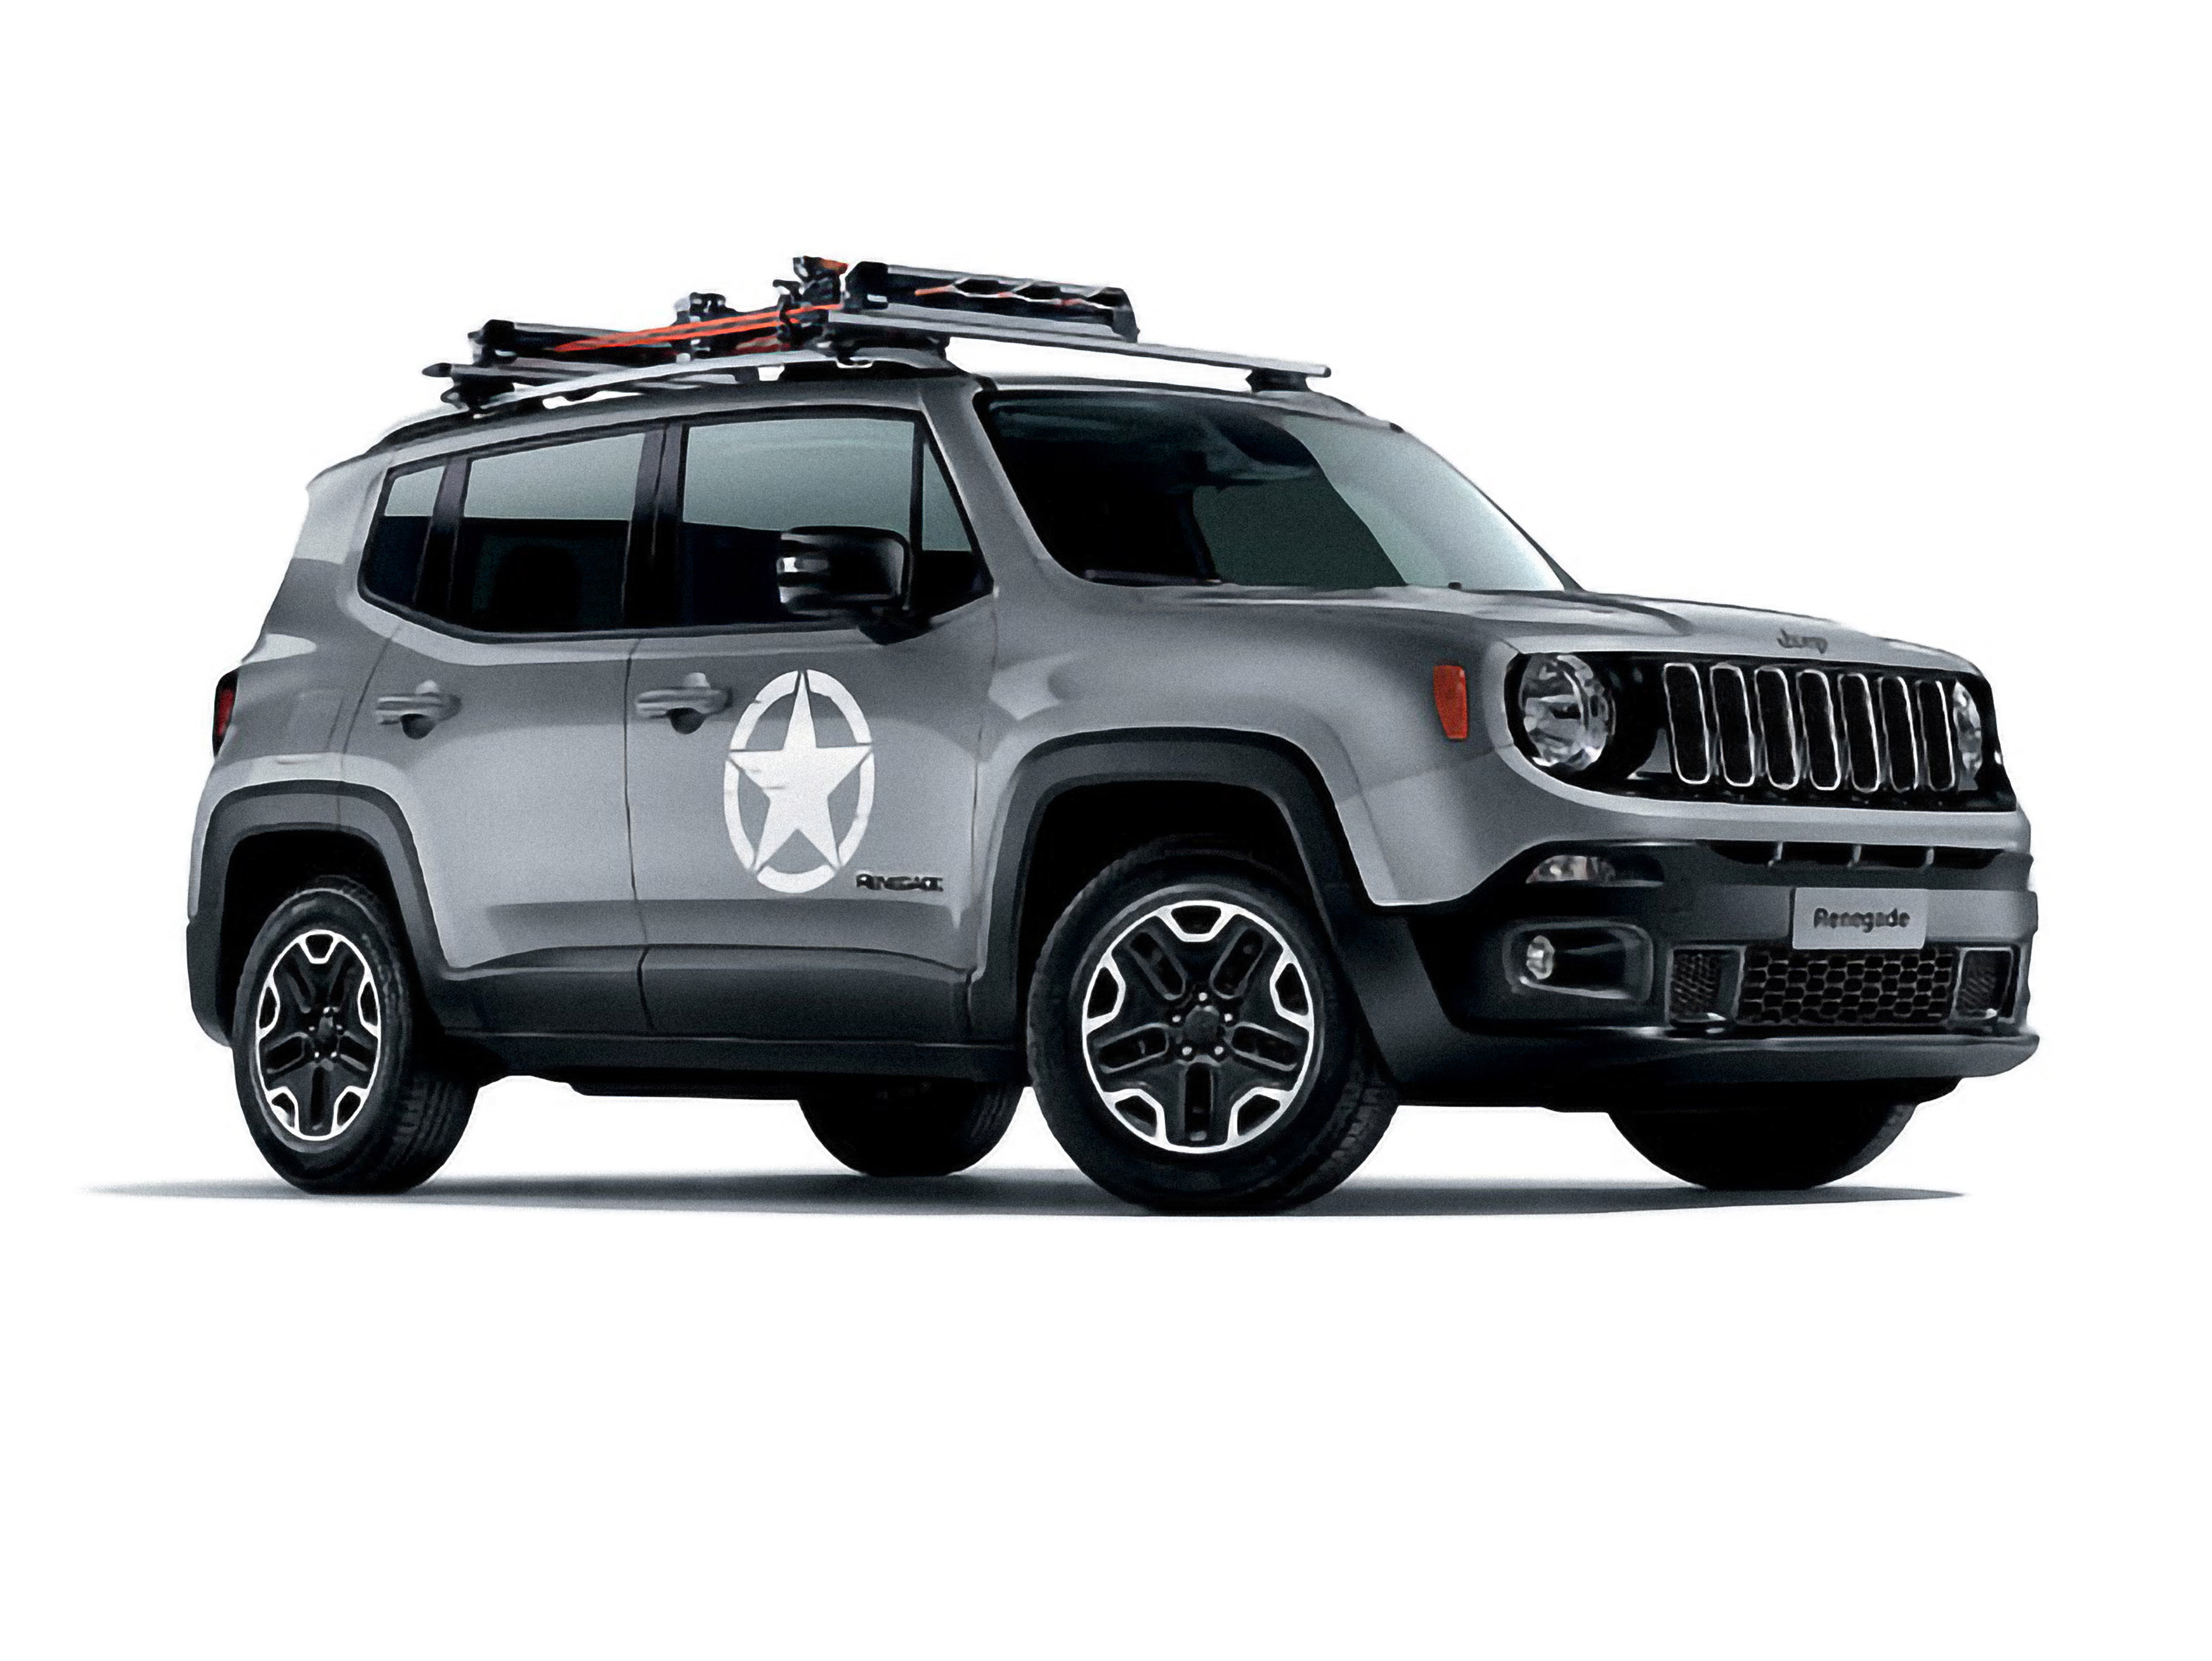 Using Jeep Rebates is a Proven Method to Pay Below Dealer Cost